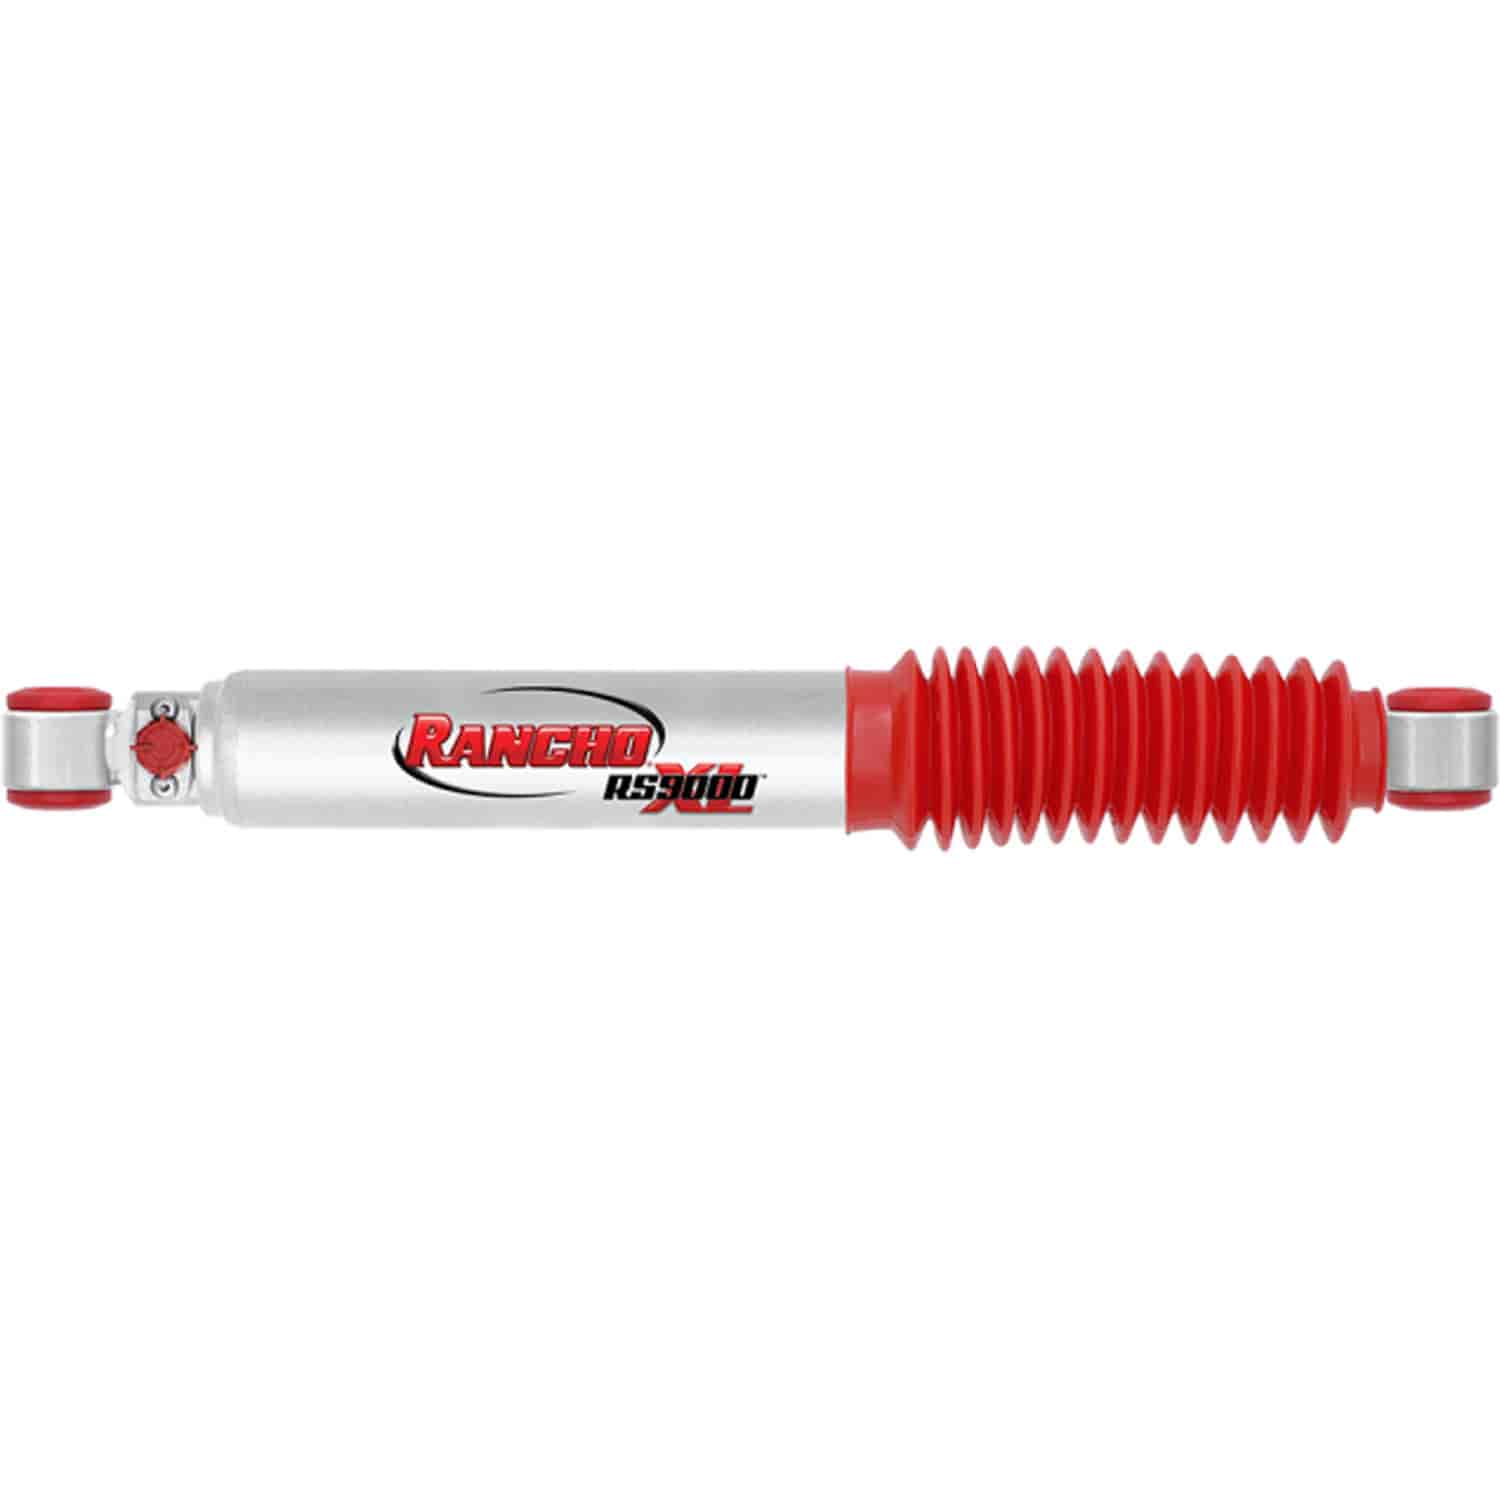 RS9000XL Rear Shock Absorber Fits for Nissan Patrol and Pathfinder